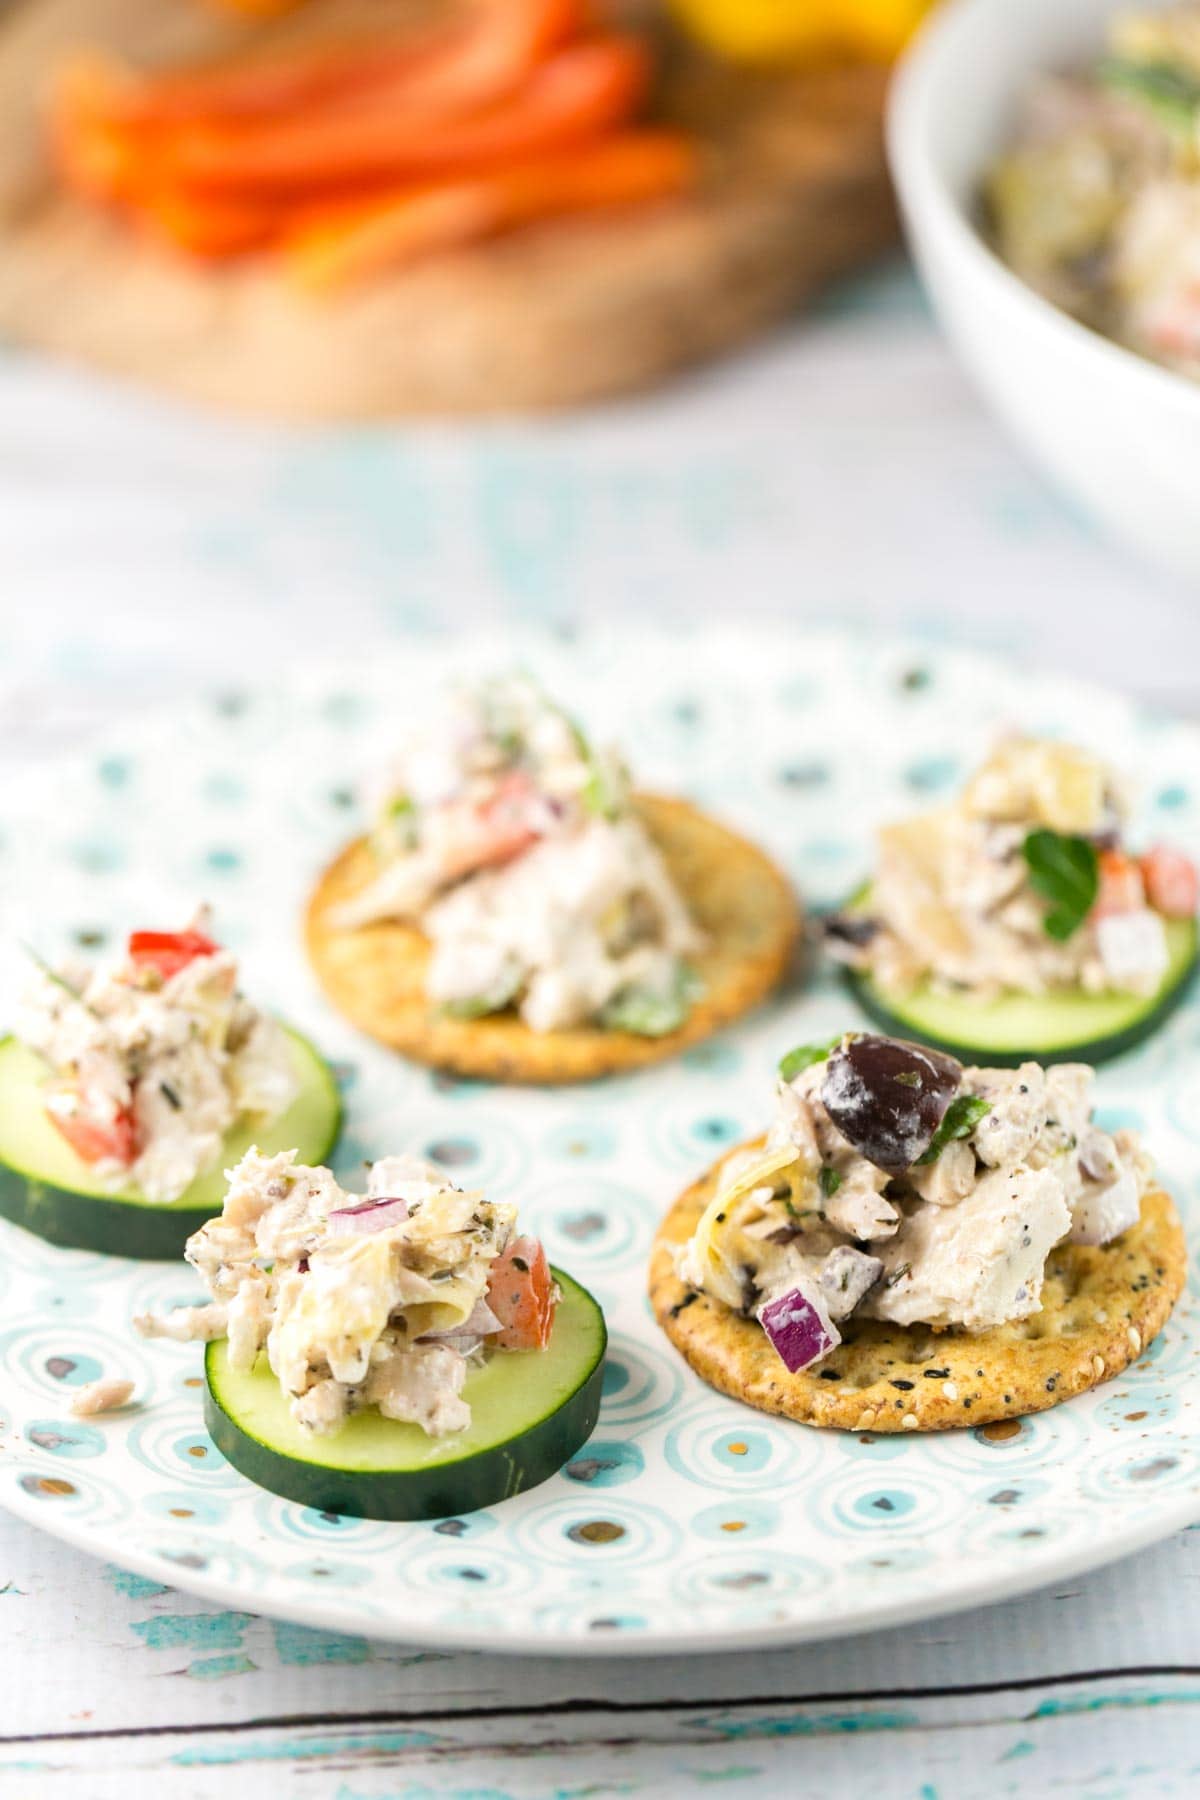 mediterranean tuna salad served on slices of cucumber and crackers on a blue and white decorative plate